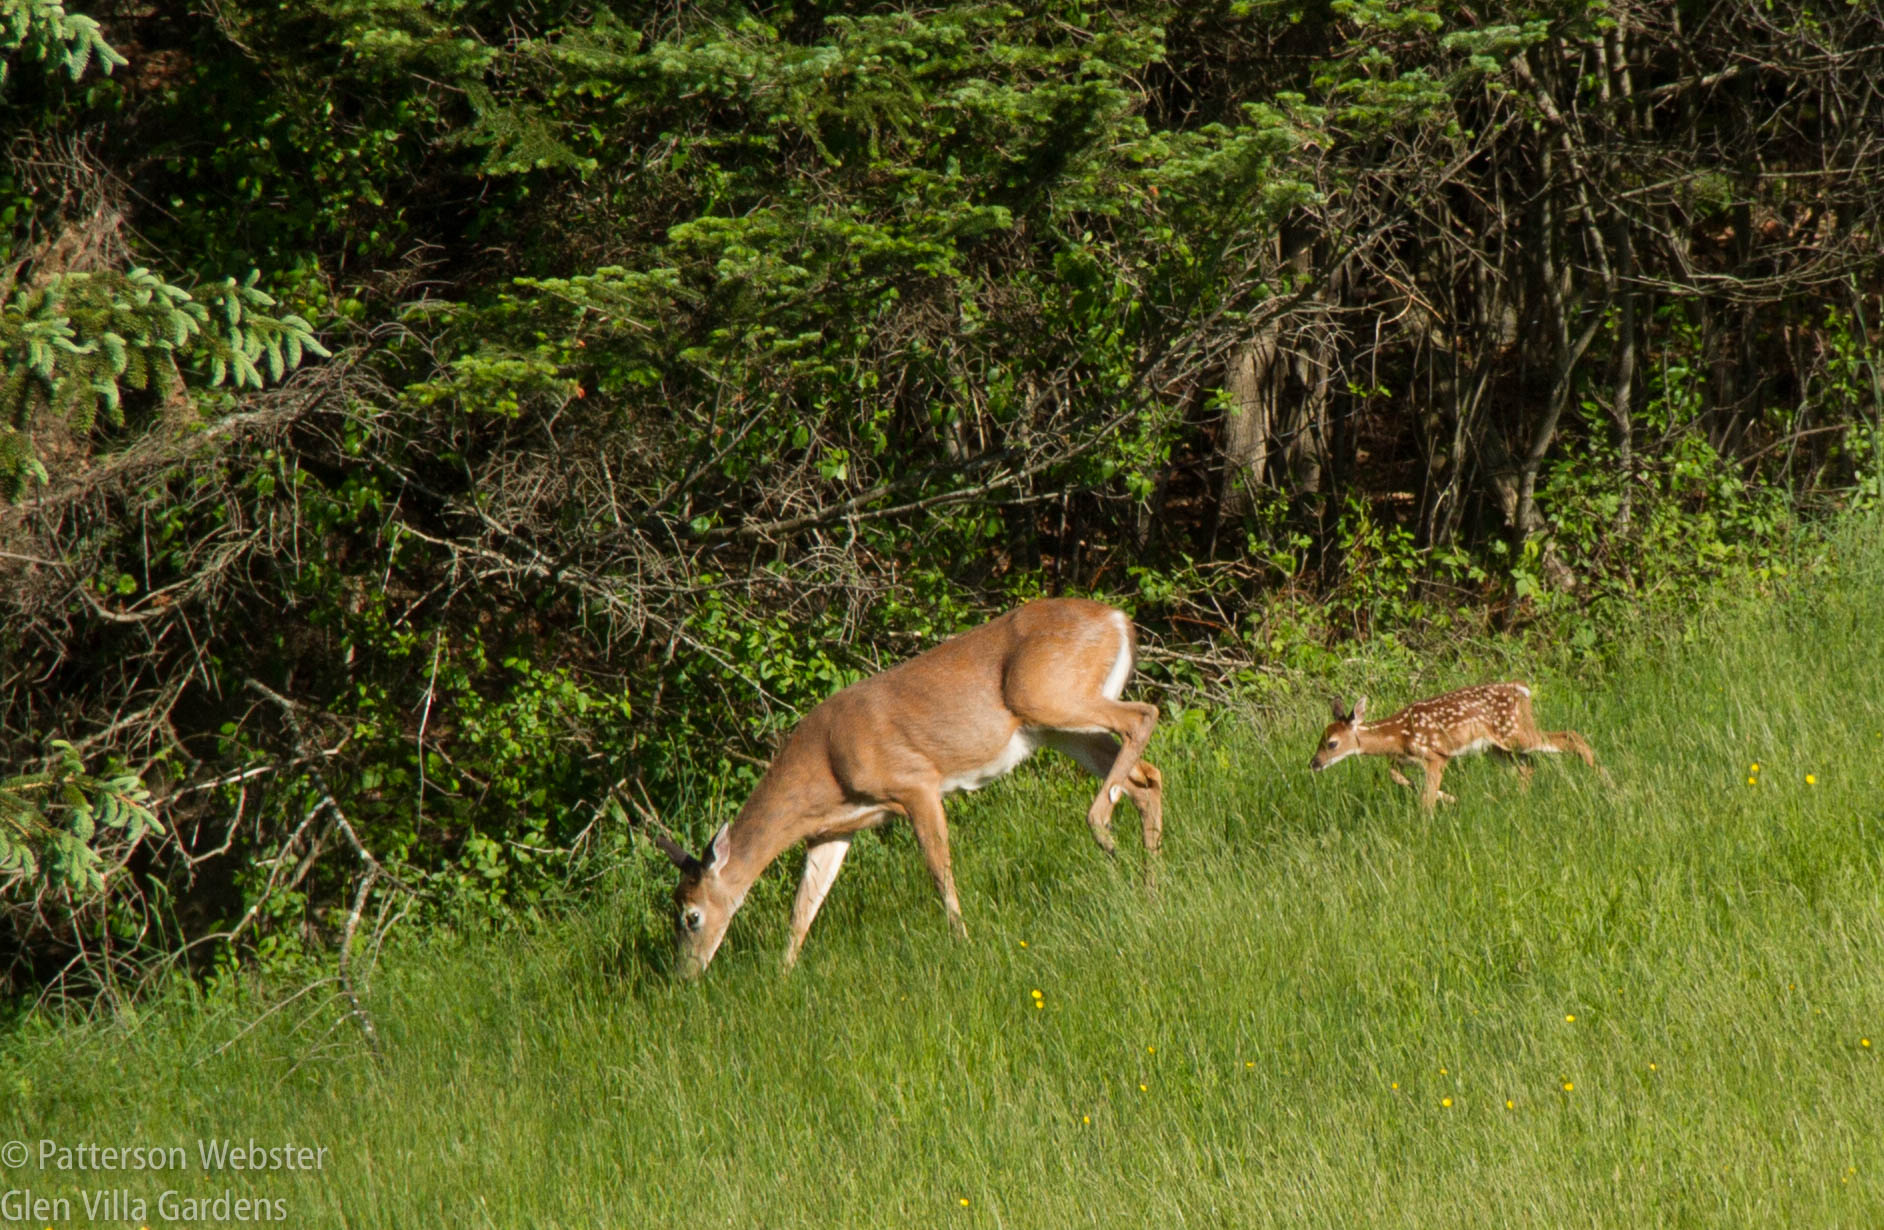 I spotted the same fawn with its mother, grazing in the field a few weeks later.